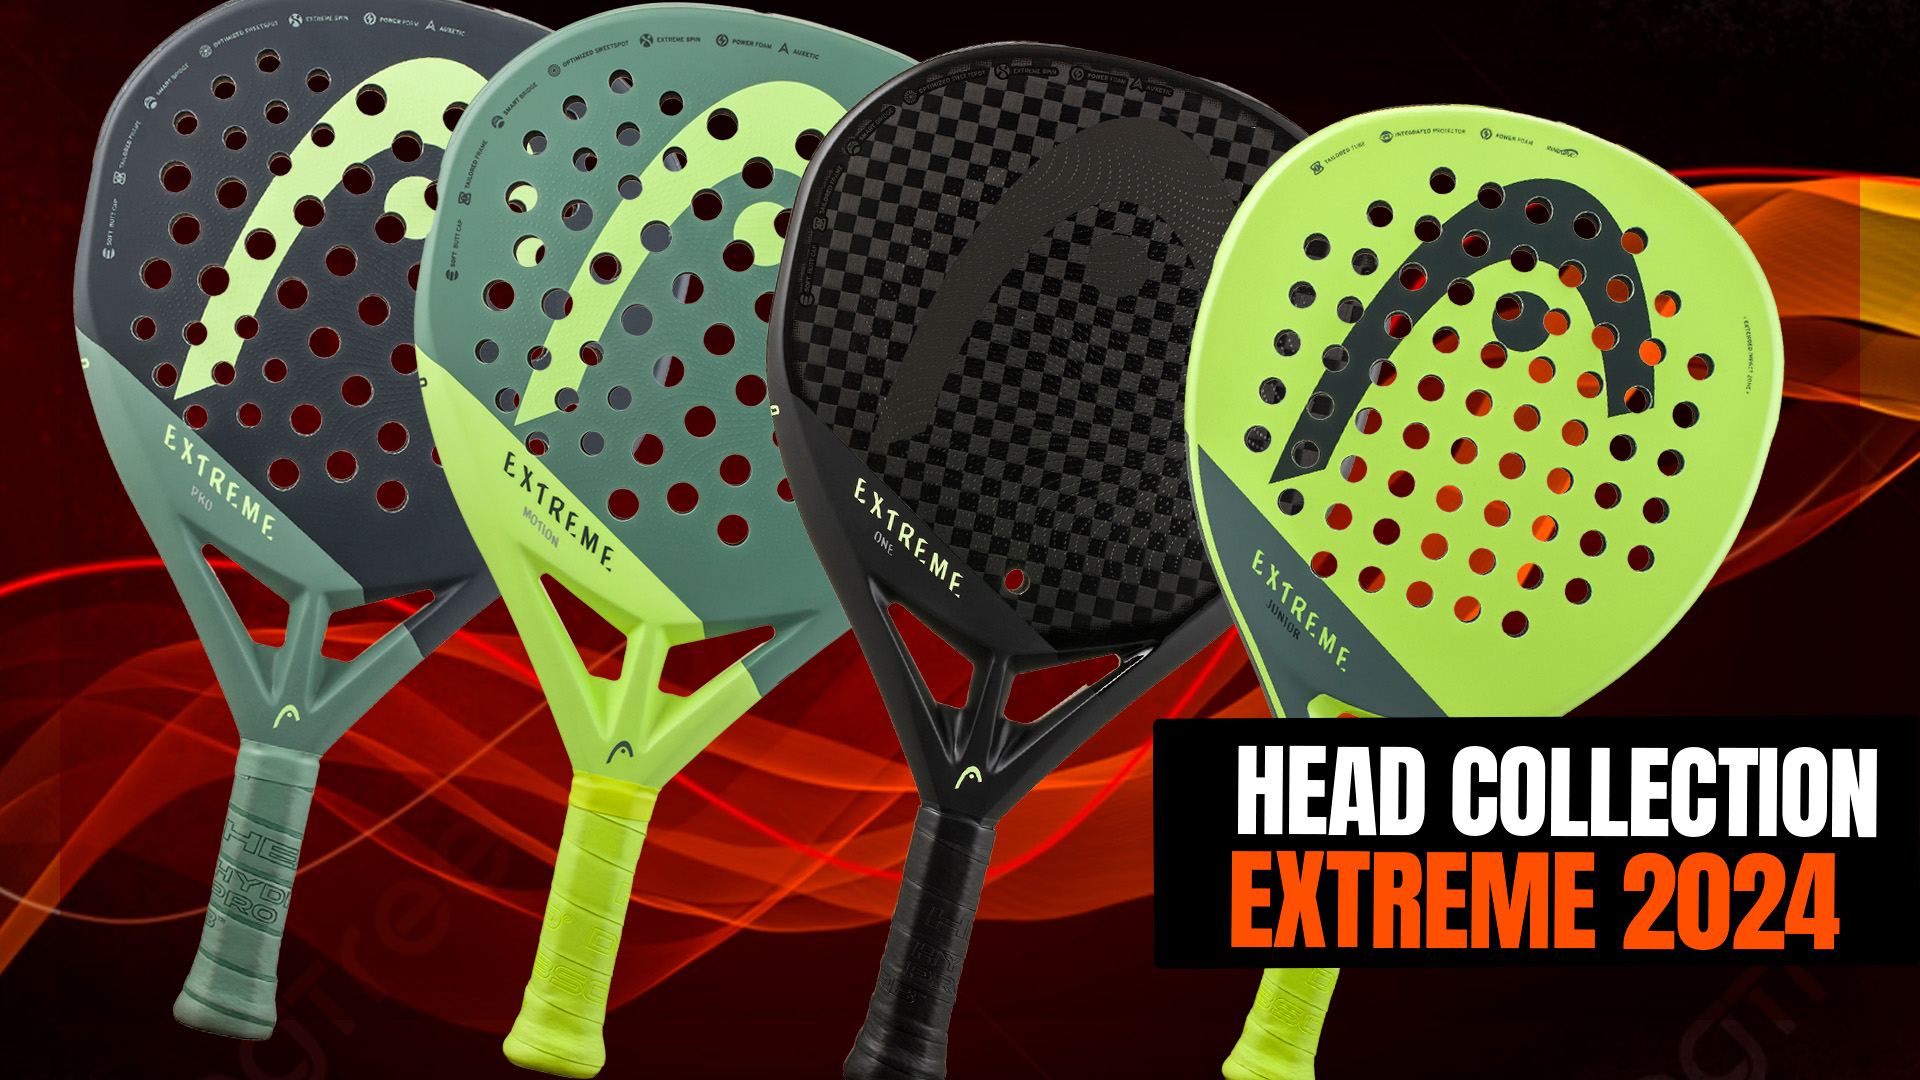 New Head Extreme 2024 collection, elevate your game with extreme power